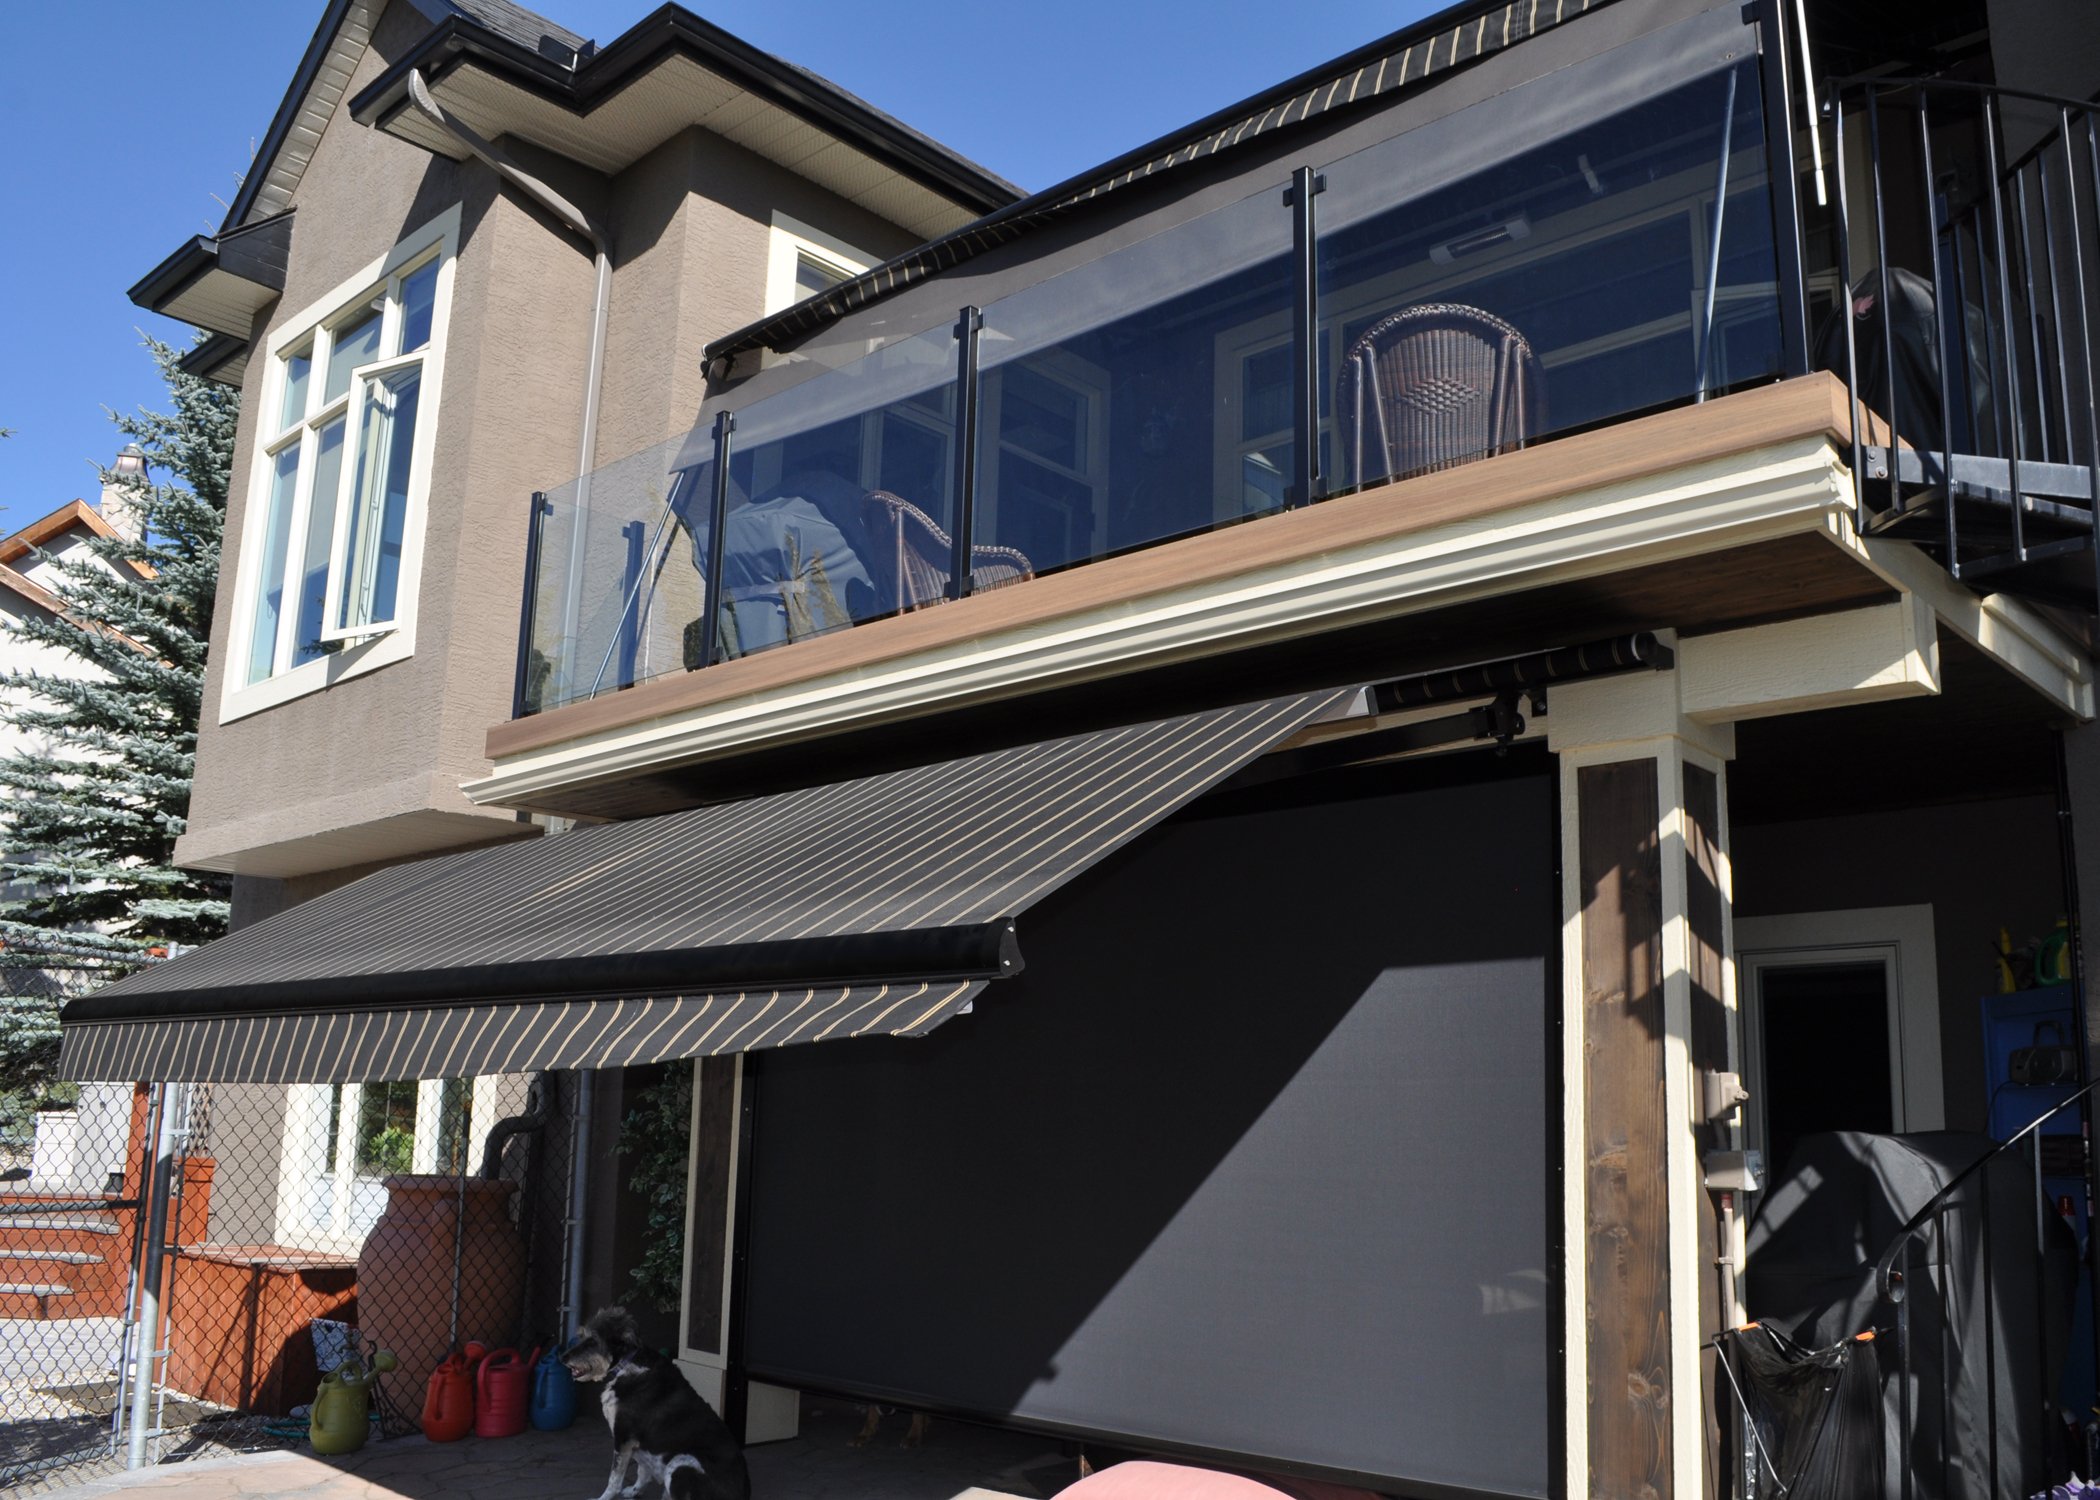 calgary-awnings-projects1.jpg